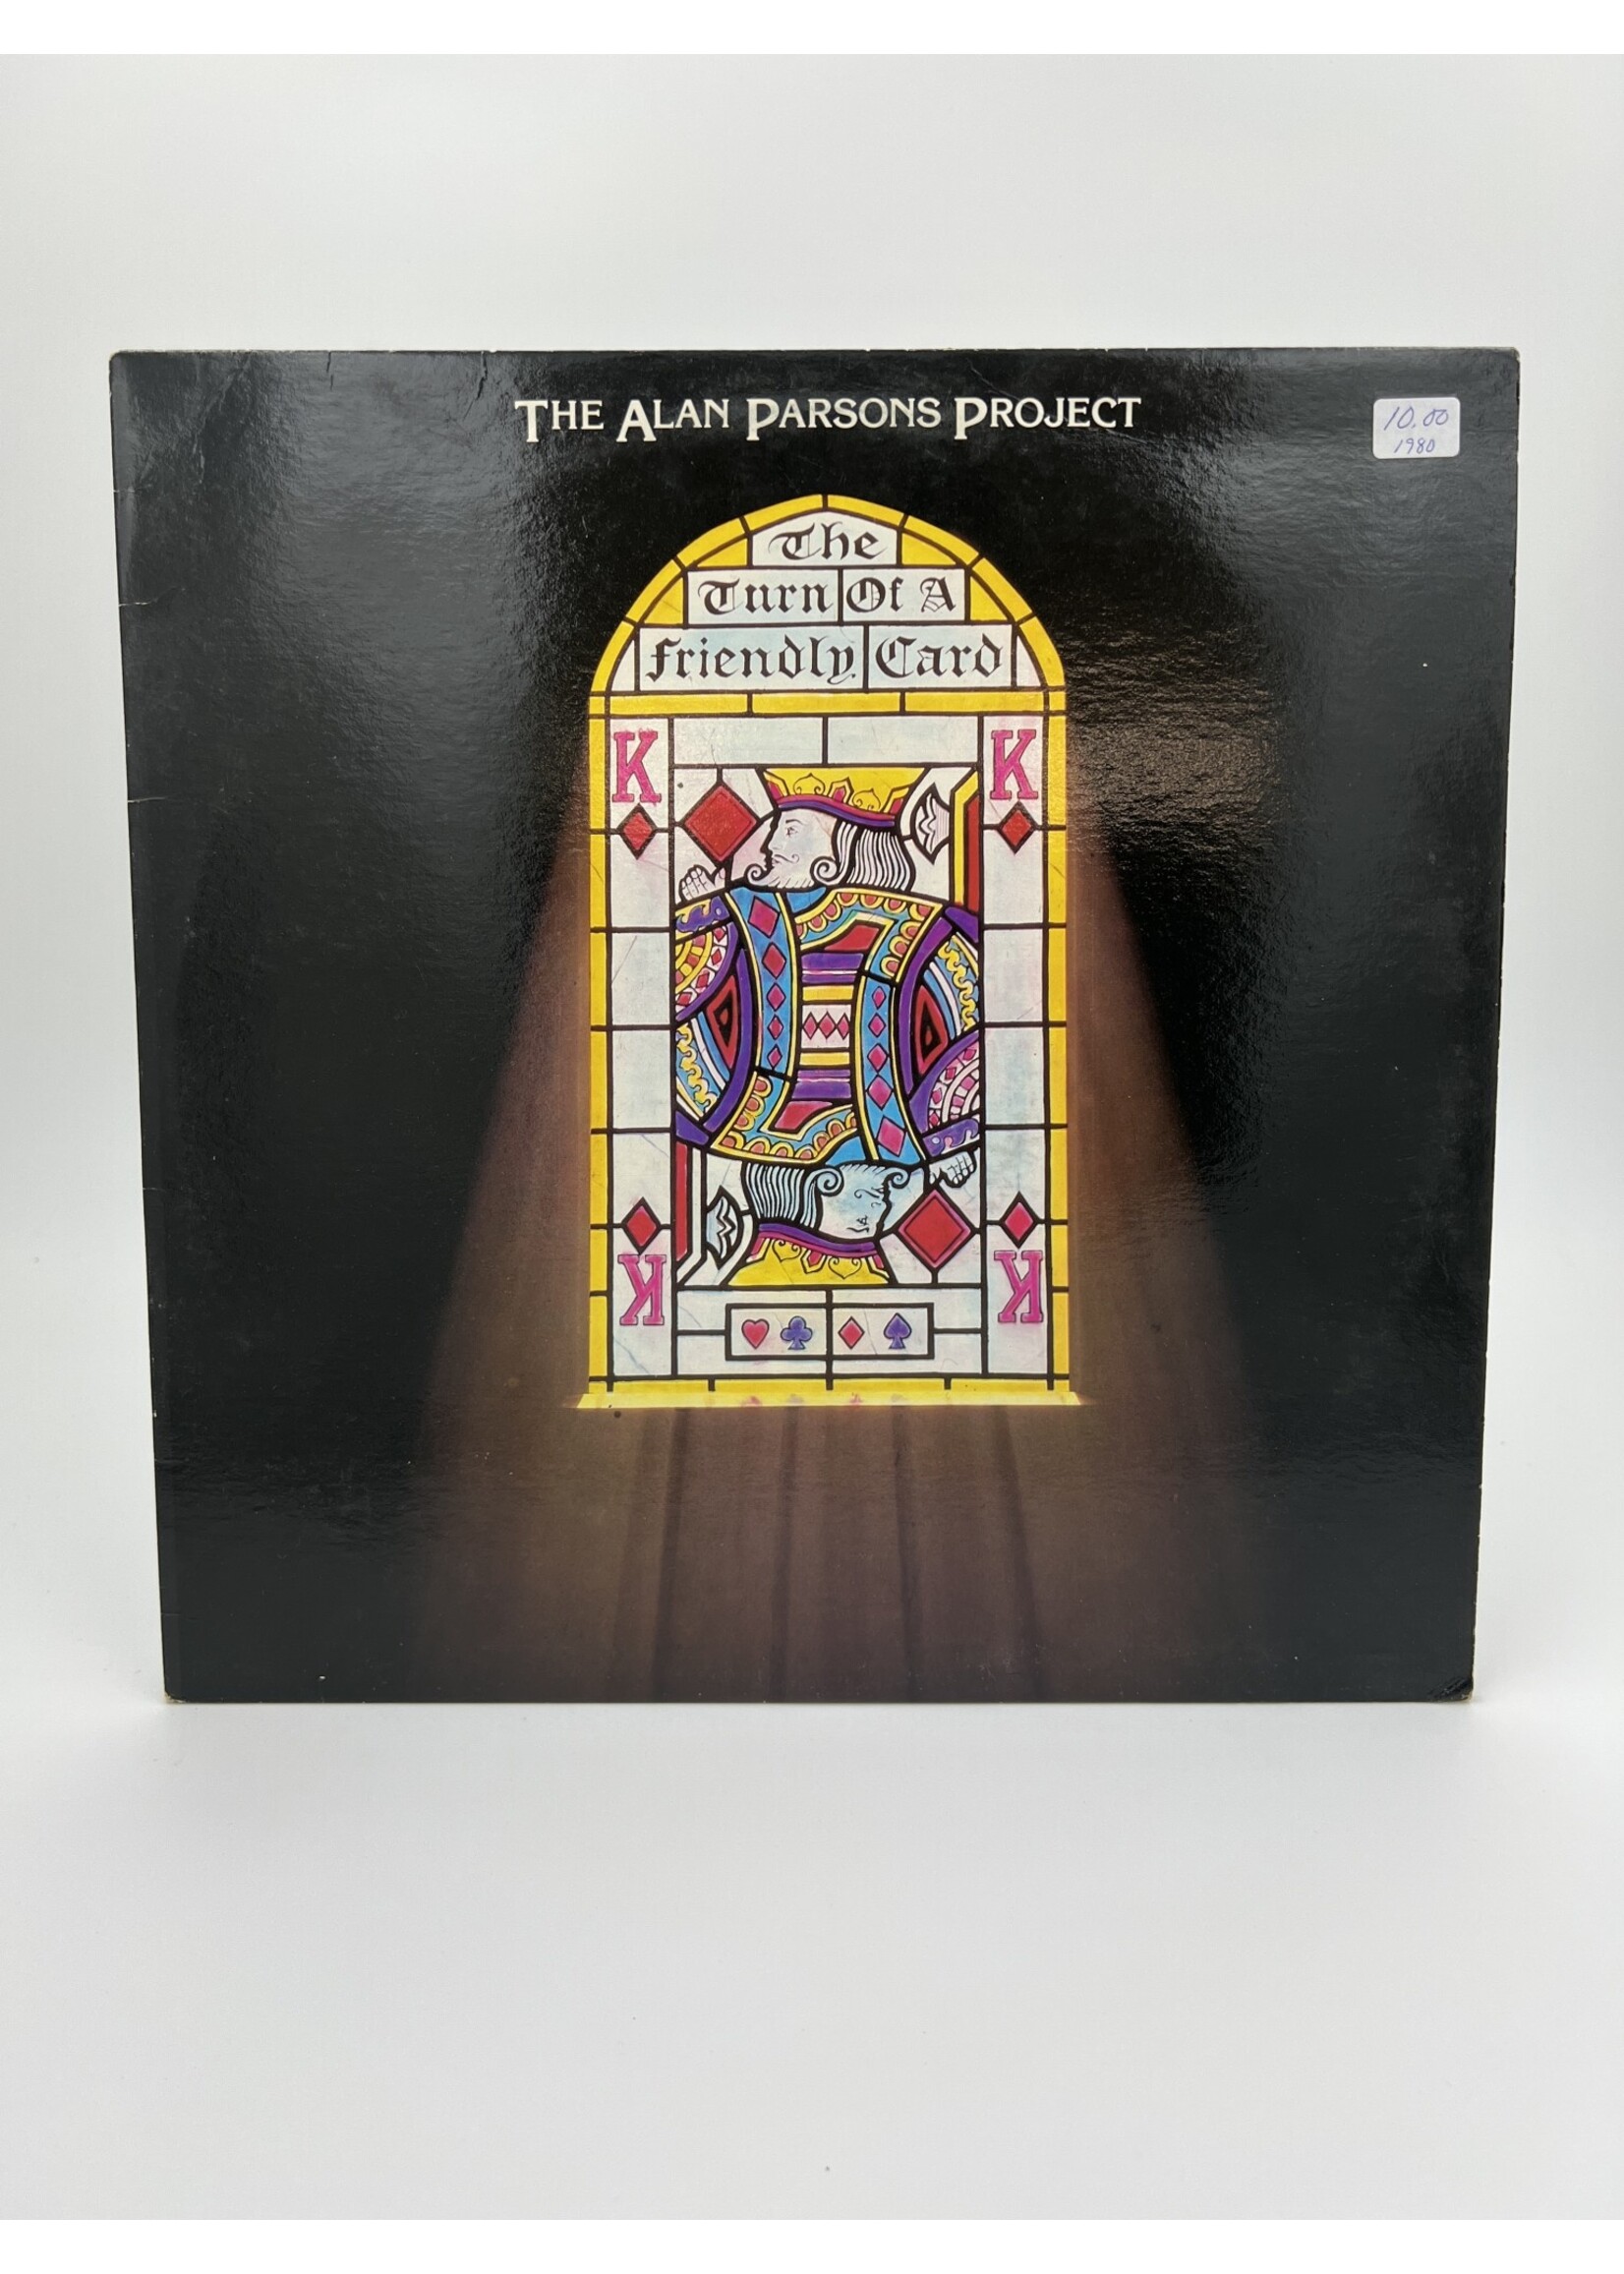 LP The Alan Parsons Project The Turn Of A Friendly Card LP RECORD